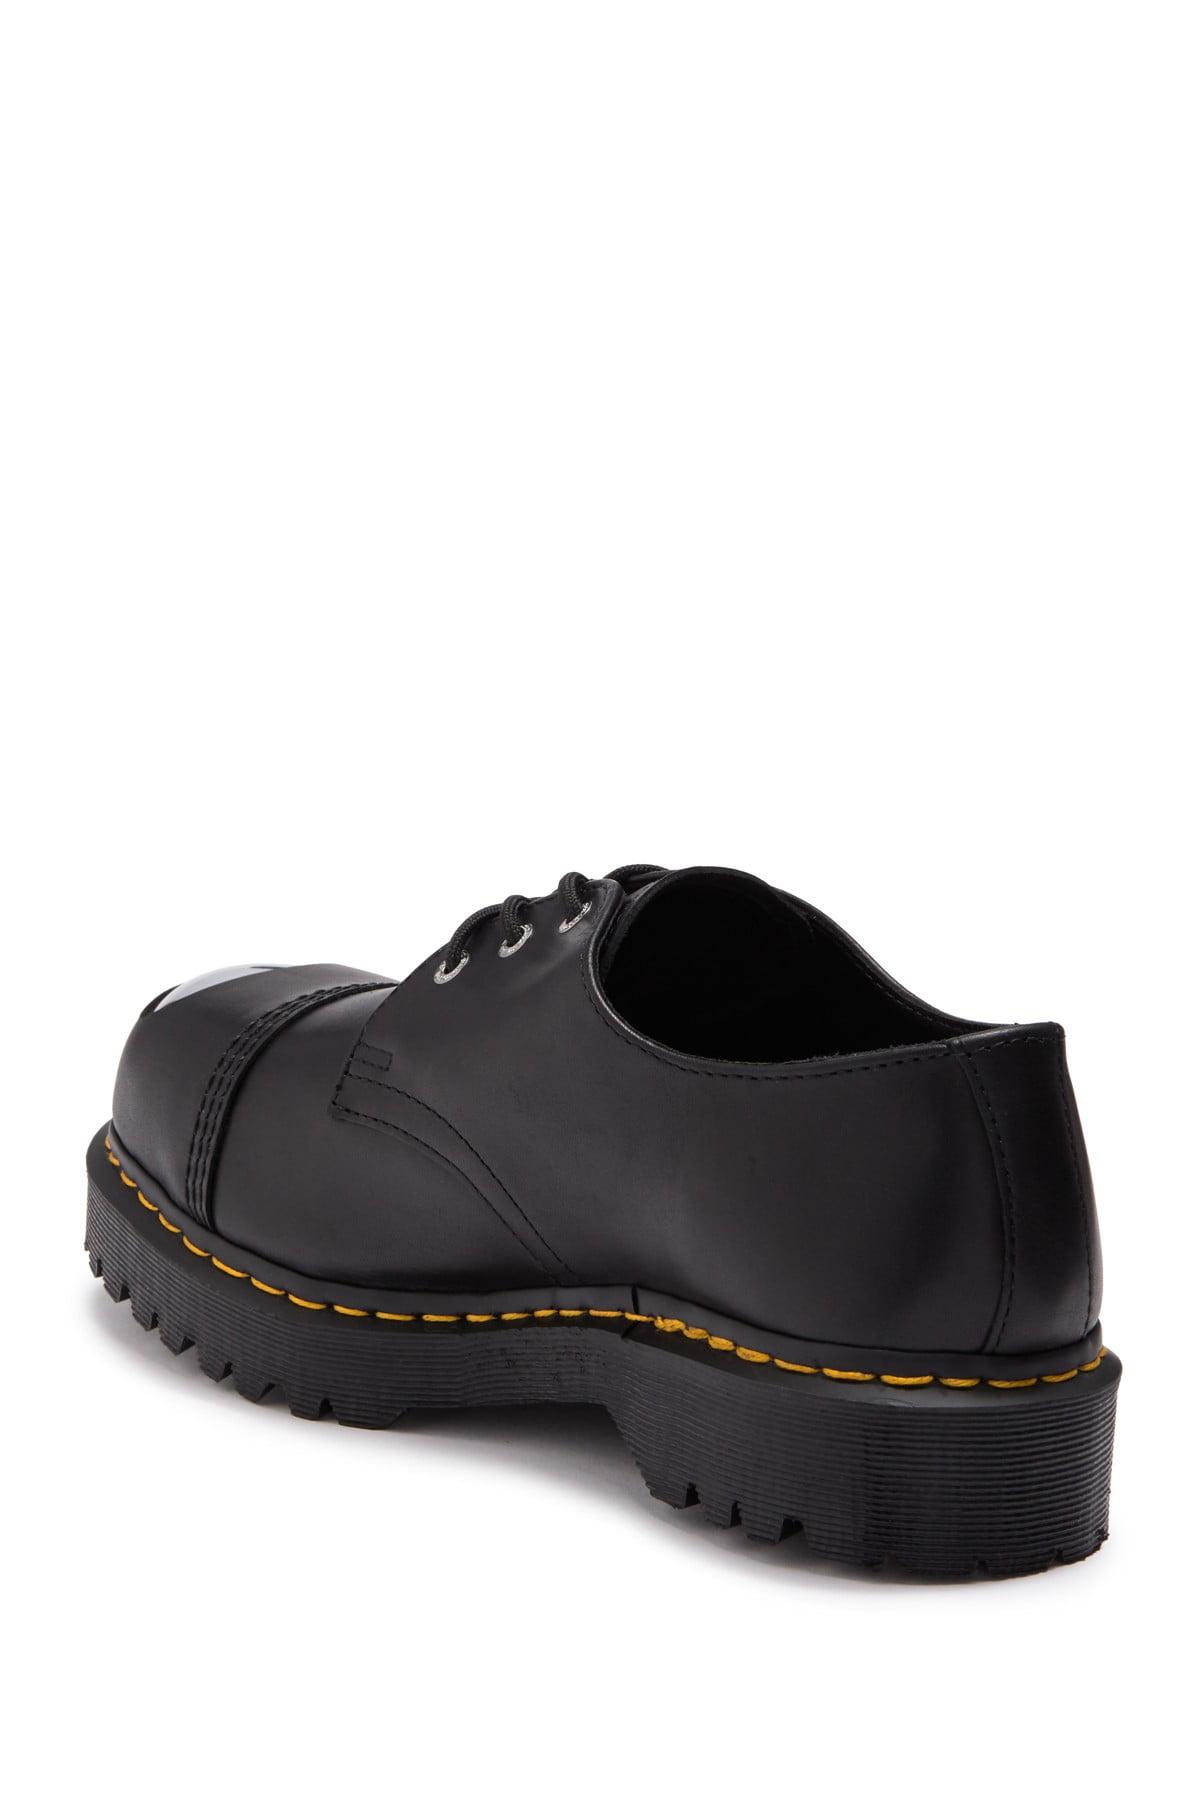 Dr. Martens Leather 1925 Luxor Cap Toe Lace-up Shoe in Black for Men | Lyst